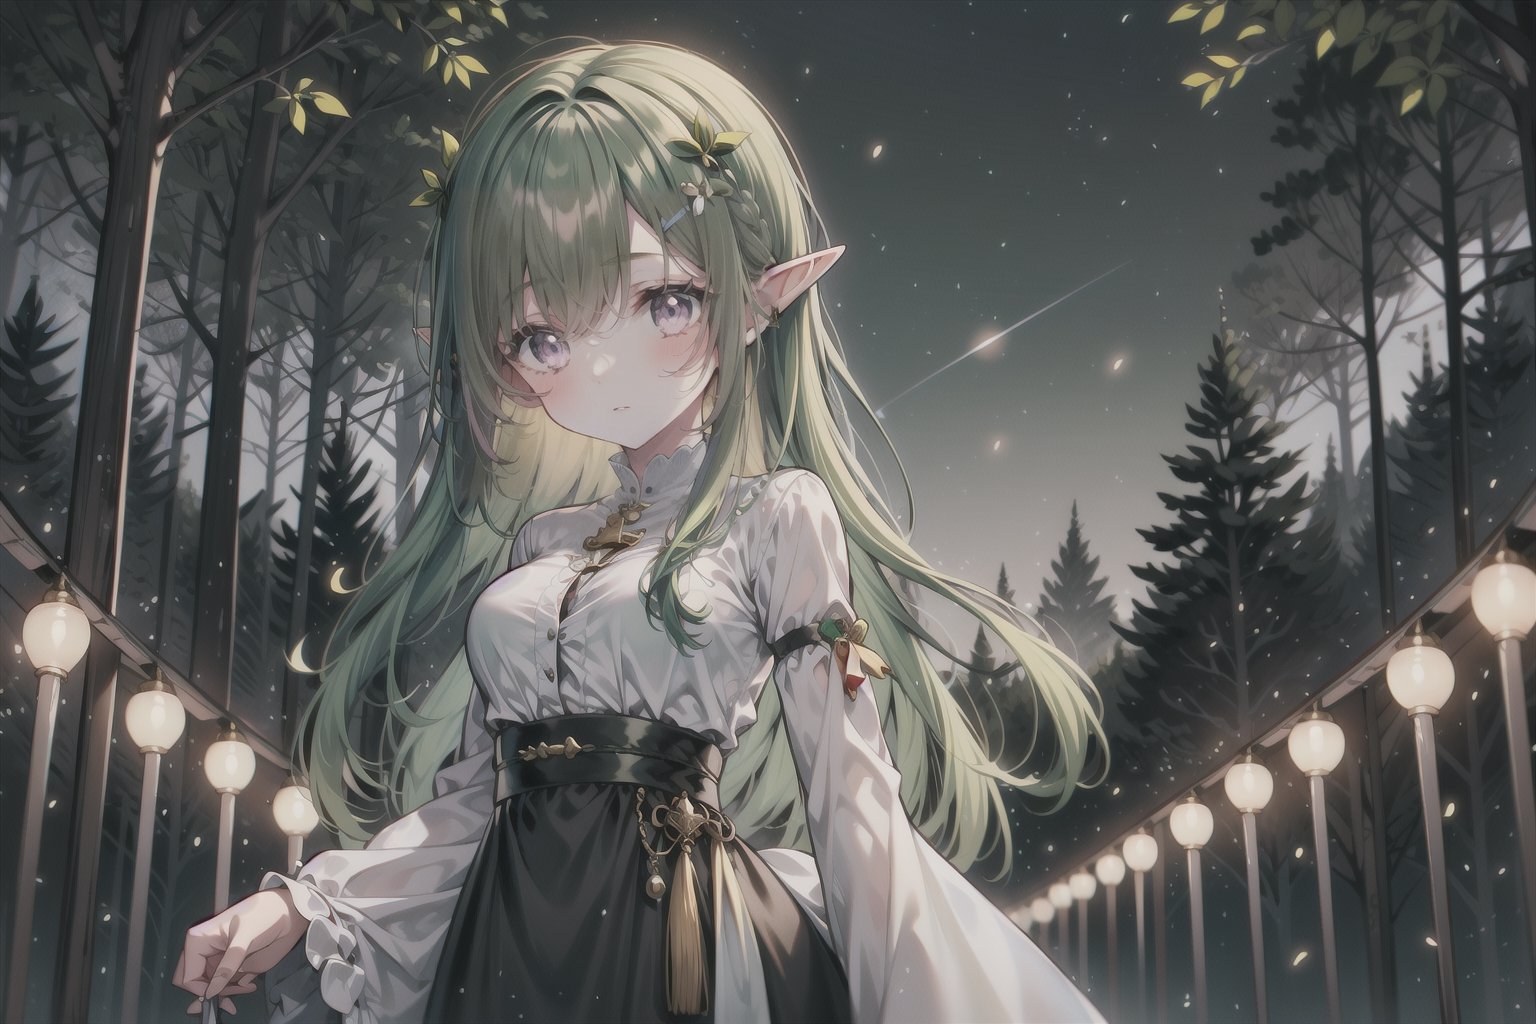 1girl,elf,elf_ears,green_hair,anime_hair,hairstyle,detailed eyes, forest, night, firefly, cowboy_shot,cute,cute style clothes,hair_accessories,accessories,aesthetic,